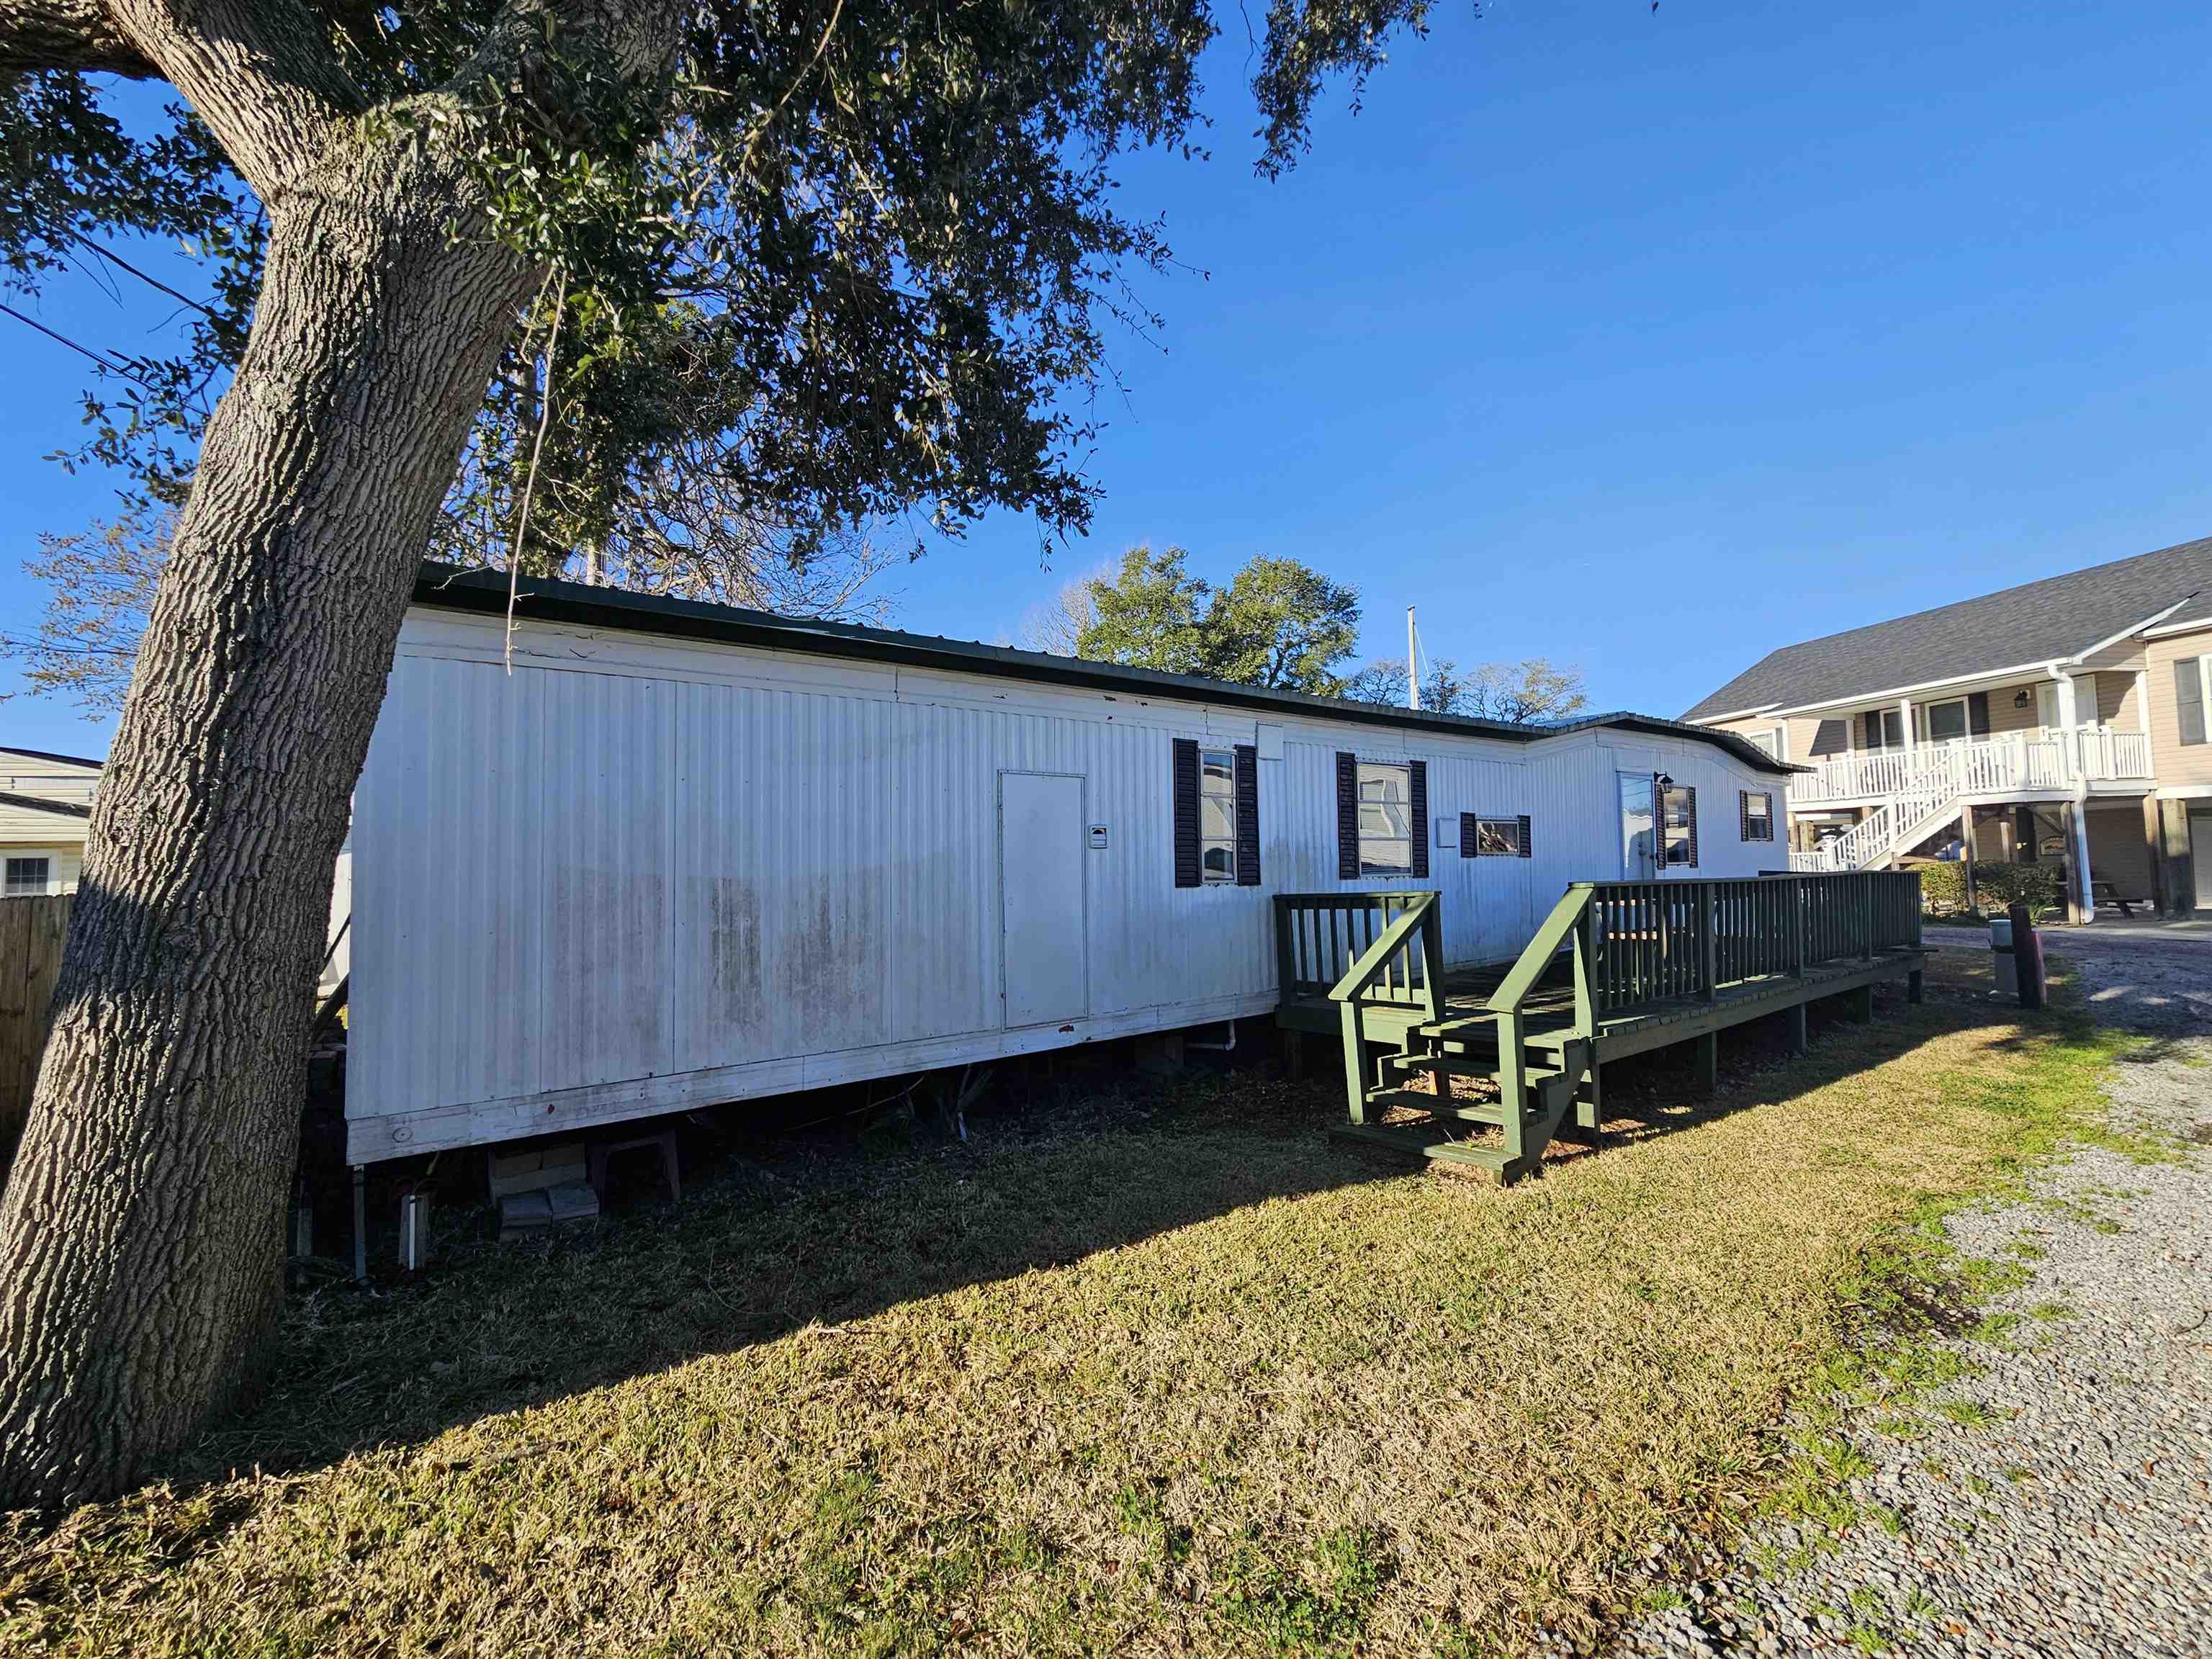 if you have been searching for an affordable cottage at the beach, look no more. this manufactured home located only 3 blocks from the beach is one in which you own the land. the home could use some tlc. no hoa.